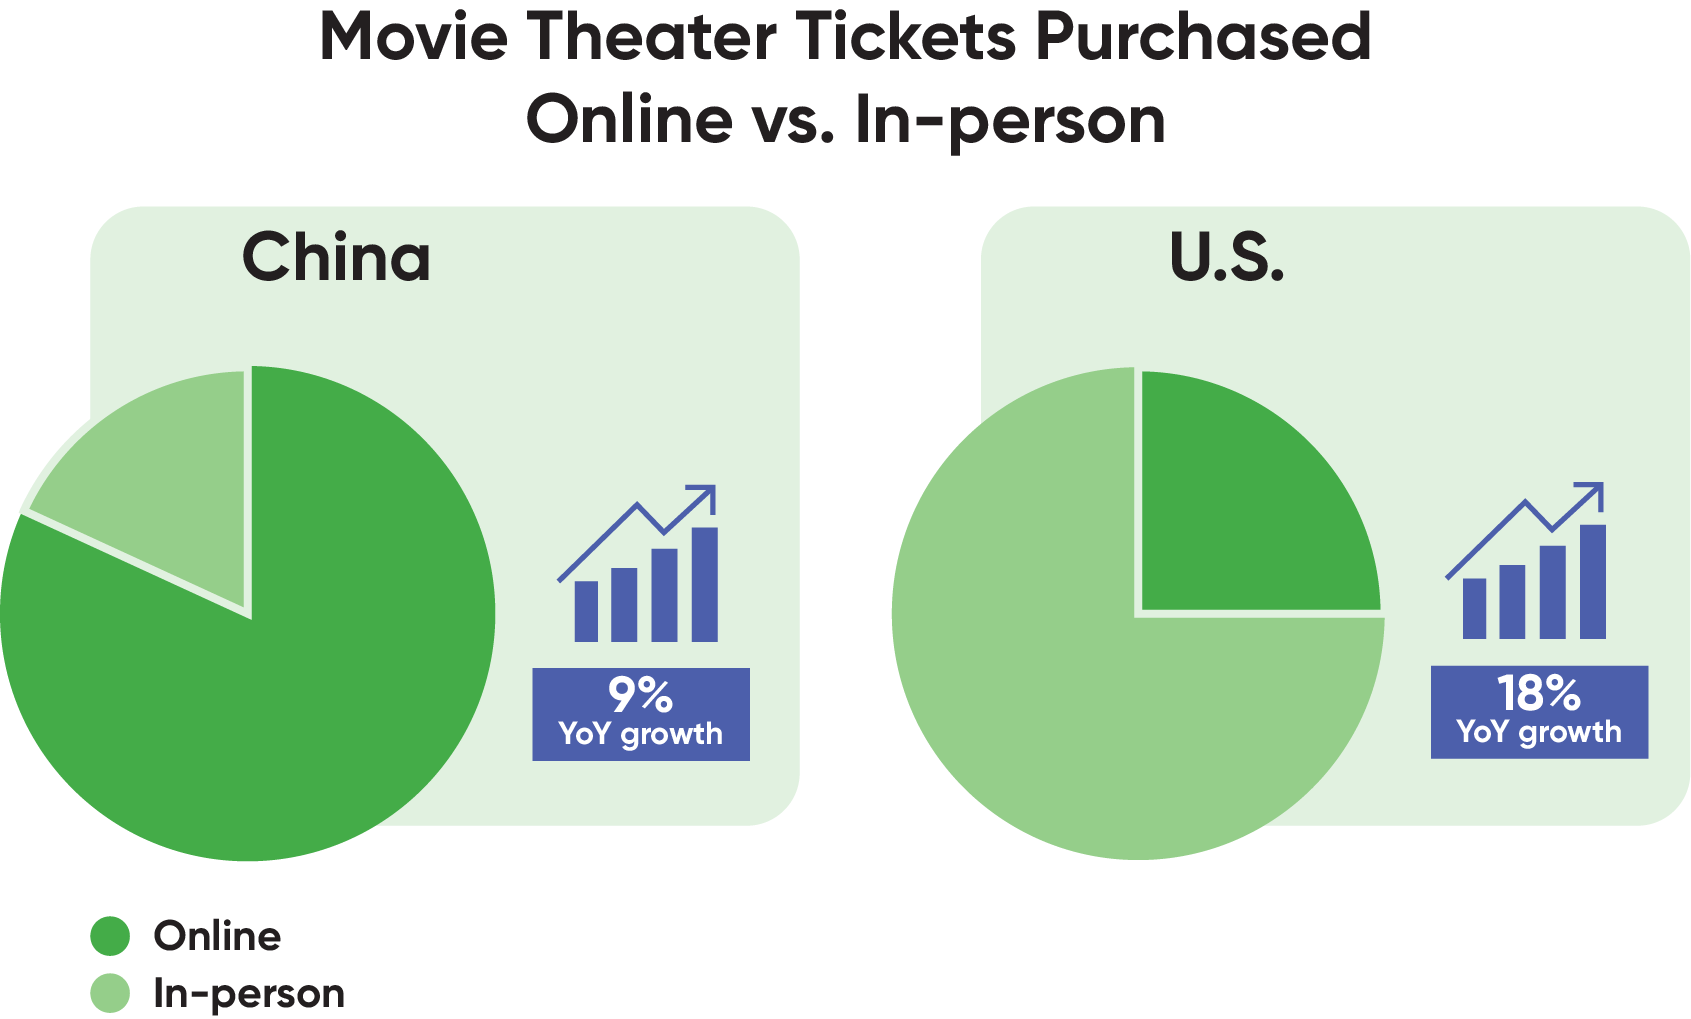 chart of movie theater tickets purchased online in China and the U.S.